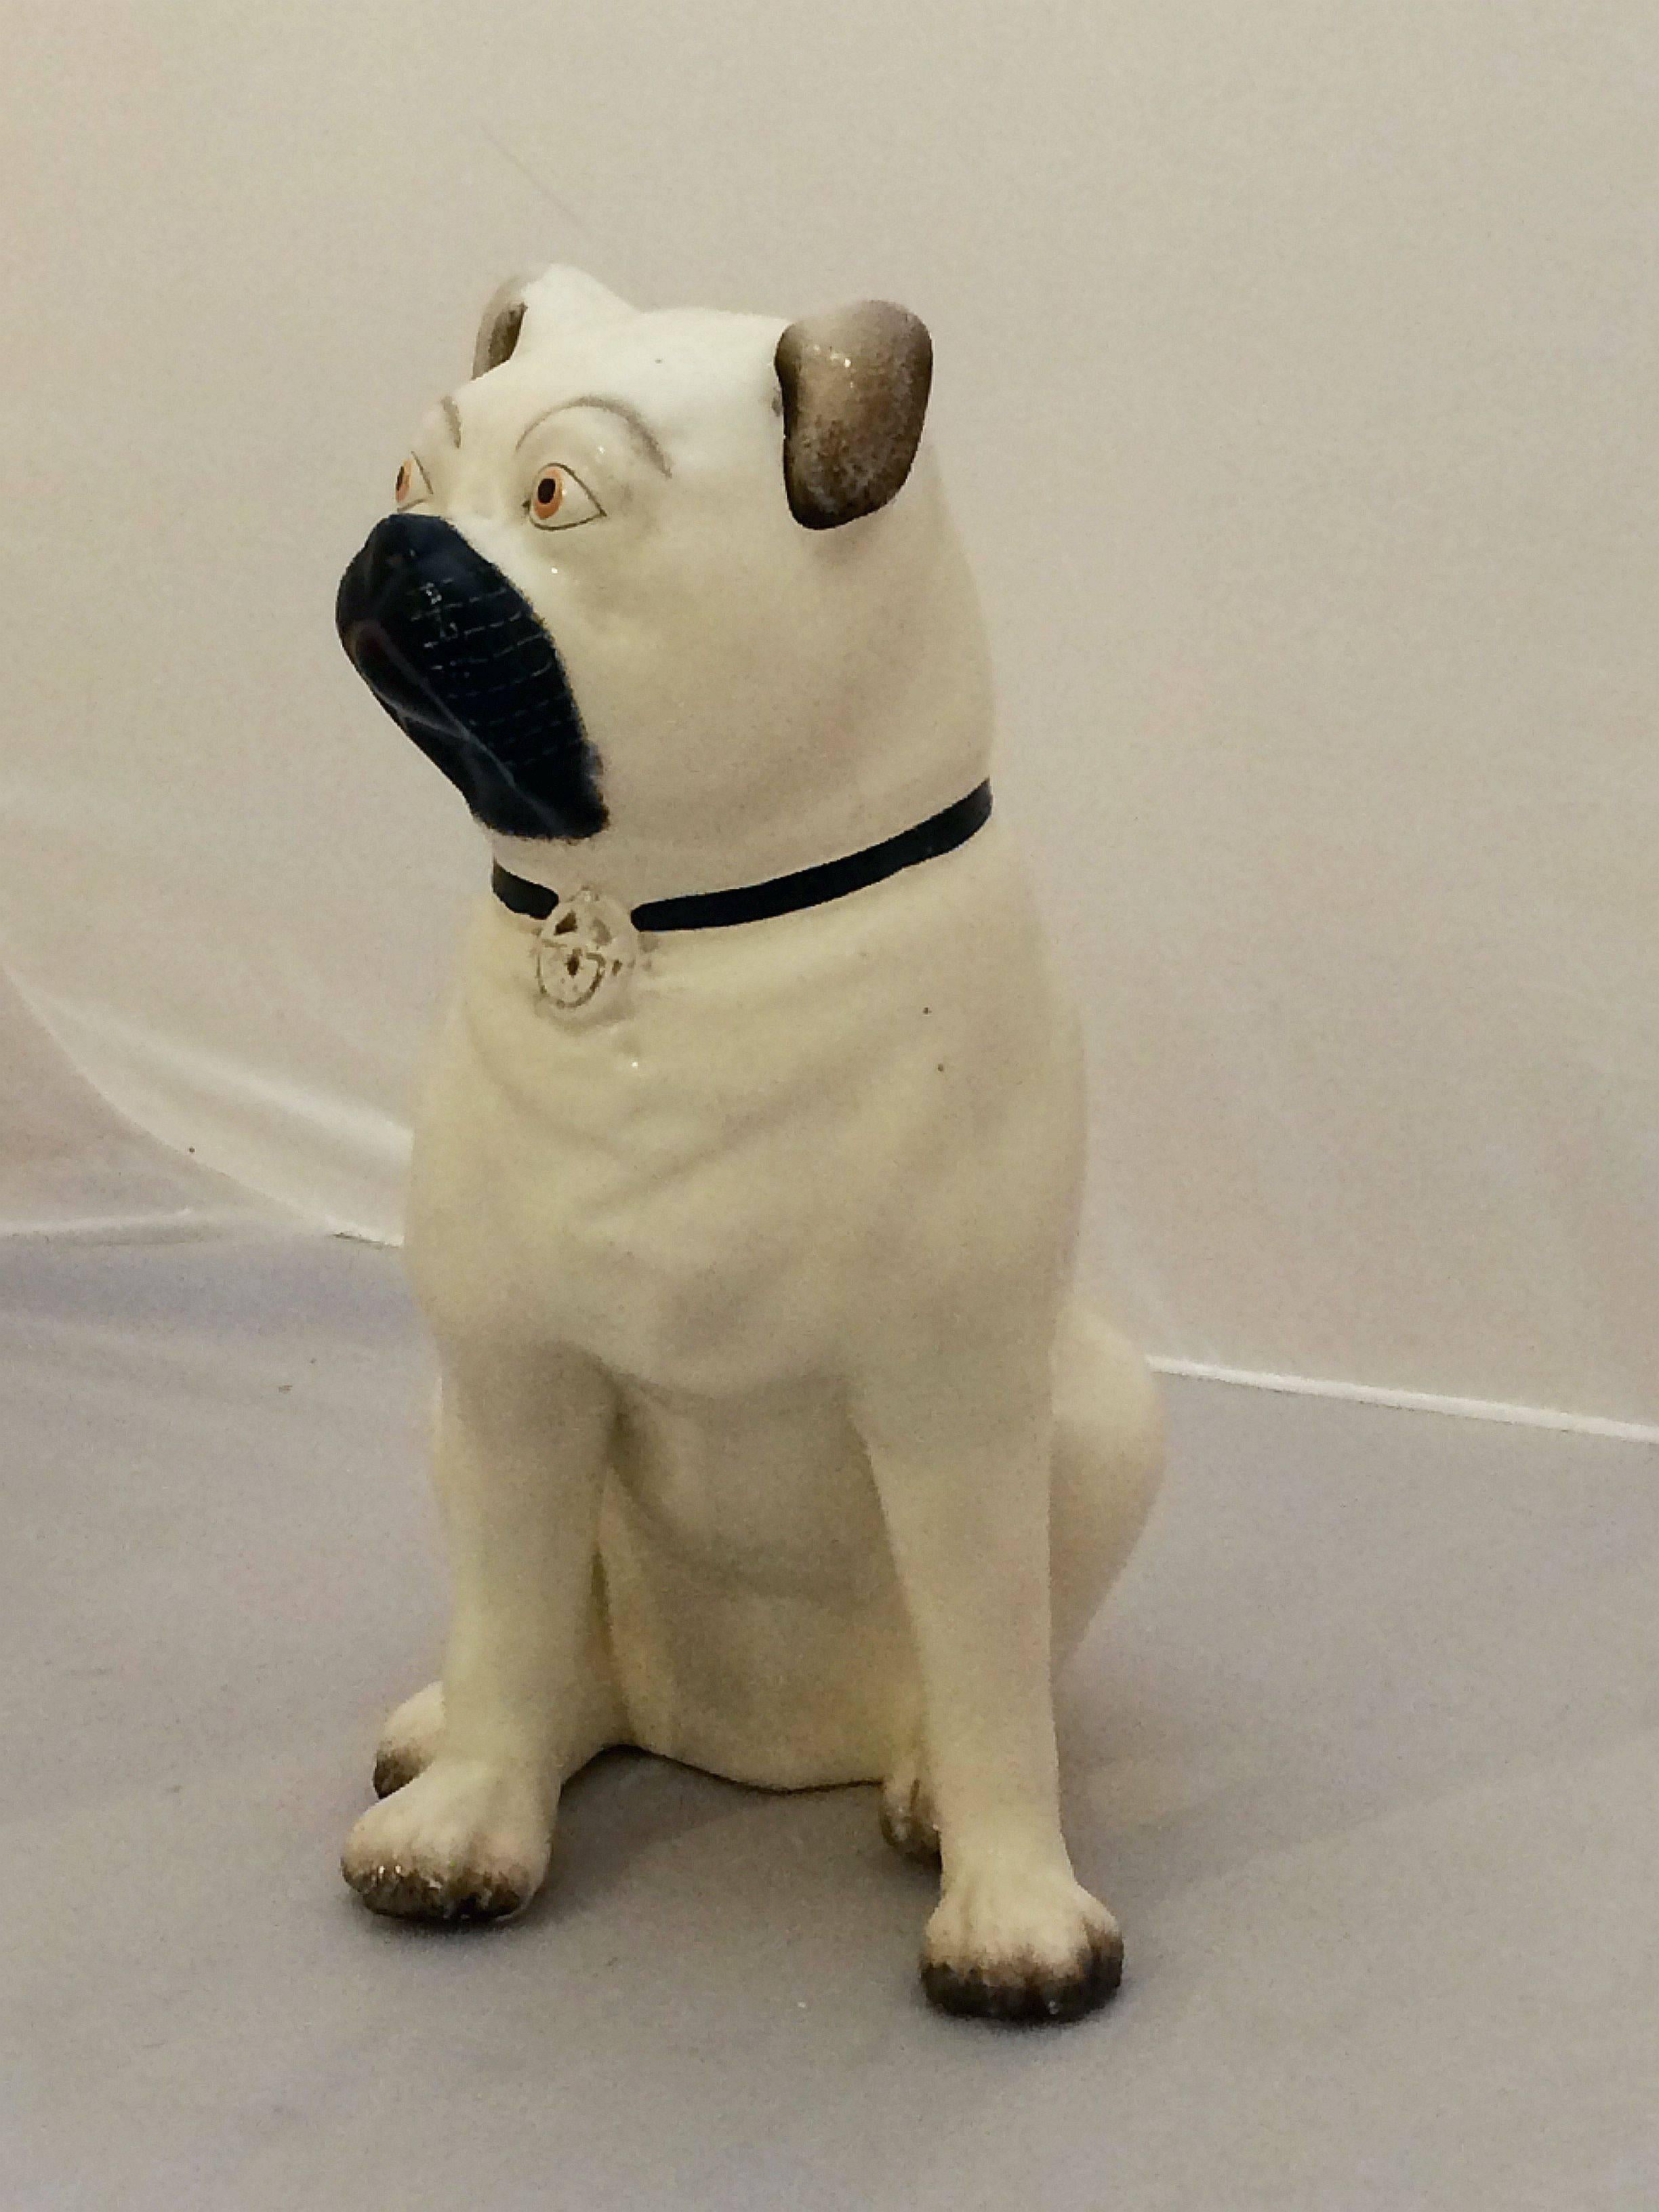 A fine model of an English pug dog from the 19th century Staffordshire Potteries in England, featuring separated legs and fine modeling in the round.